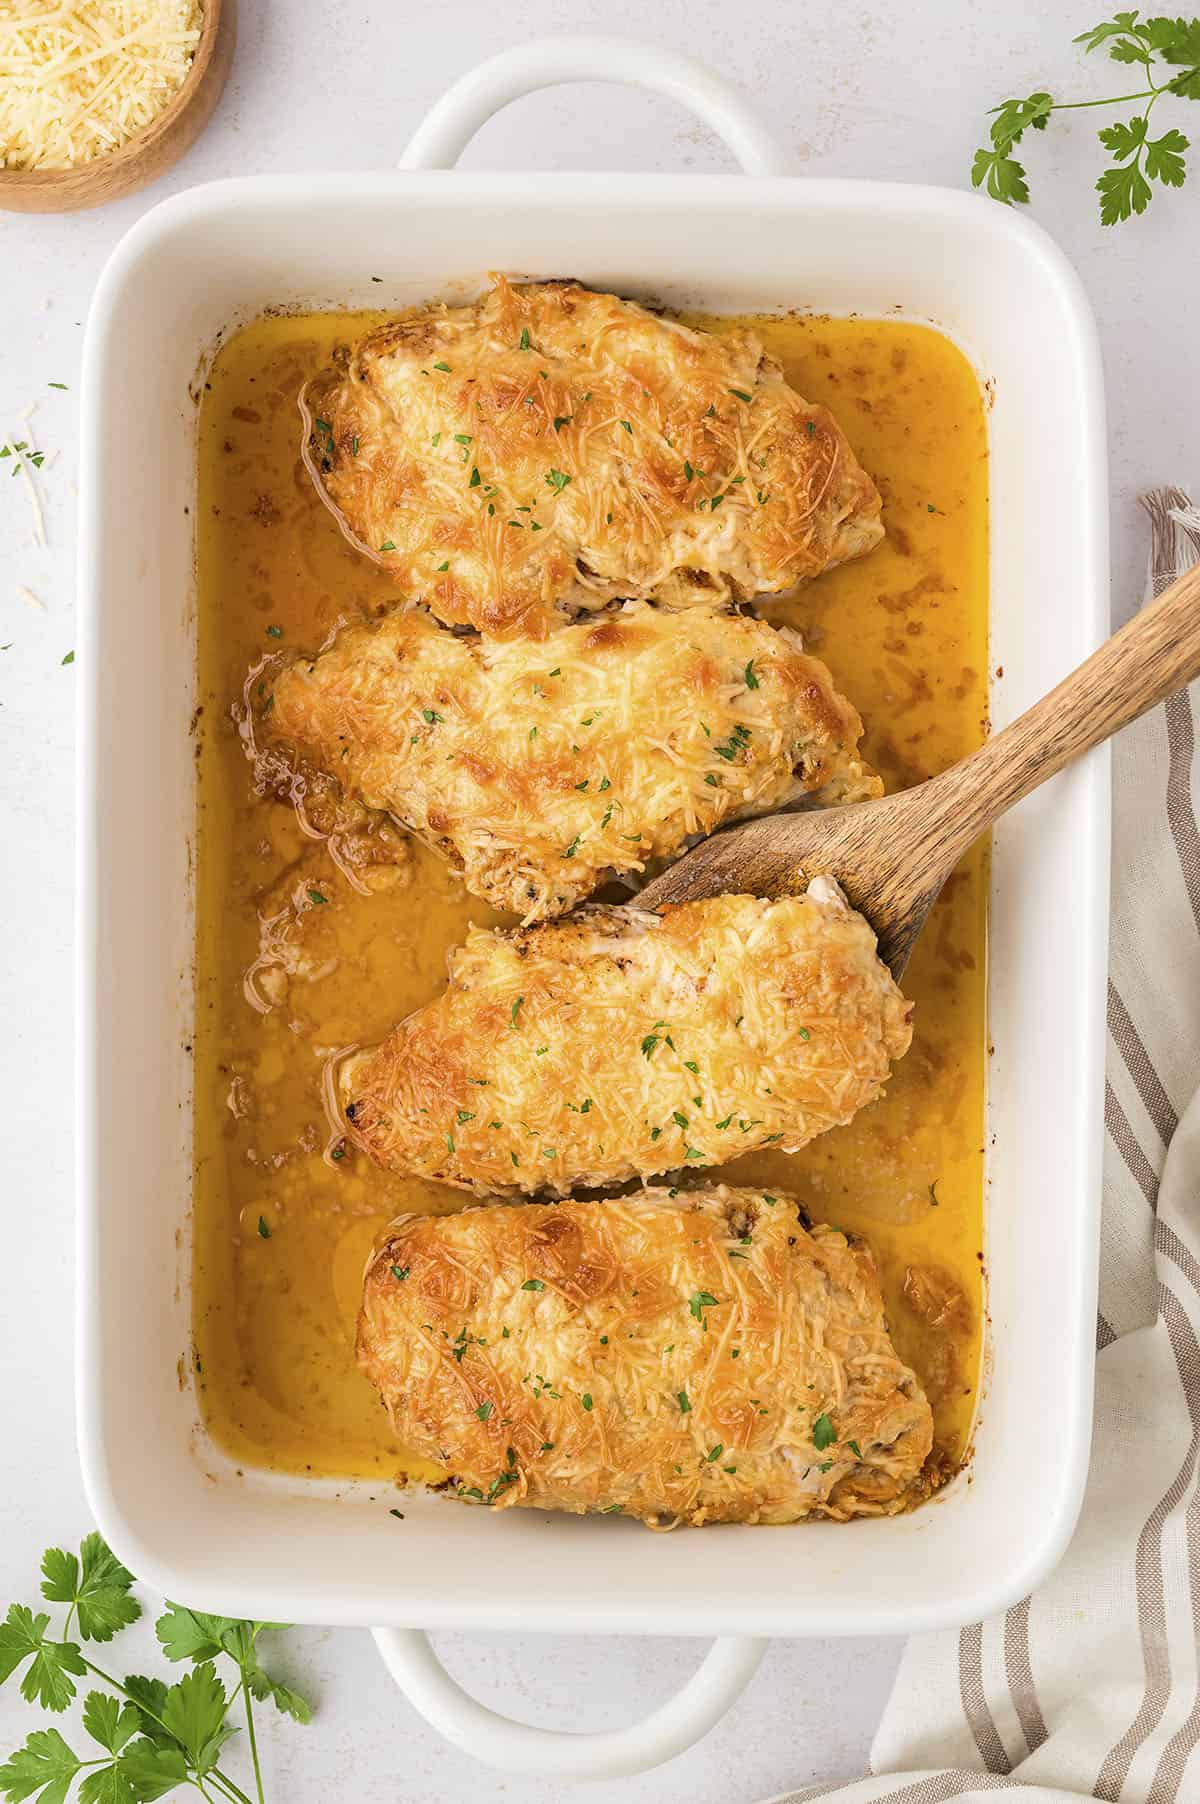 Baked parmesan crusted chicken with mayo in white baking dish.